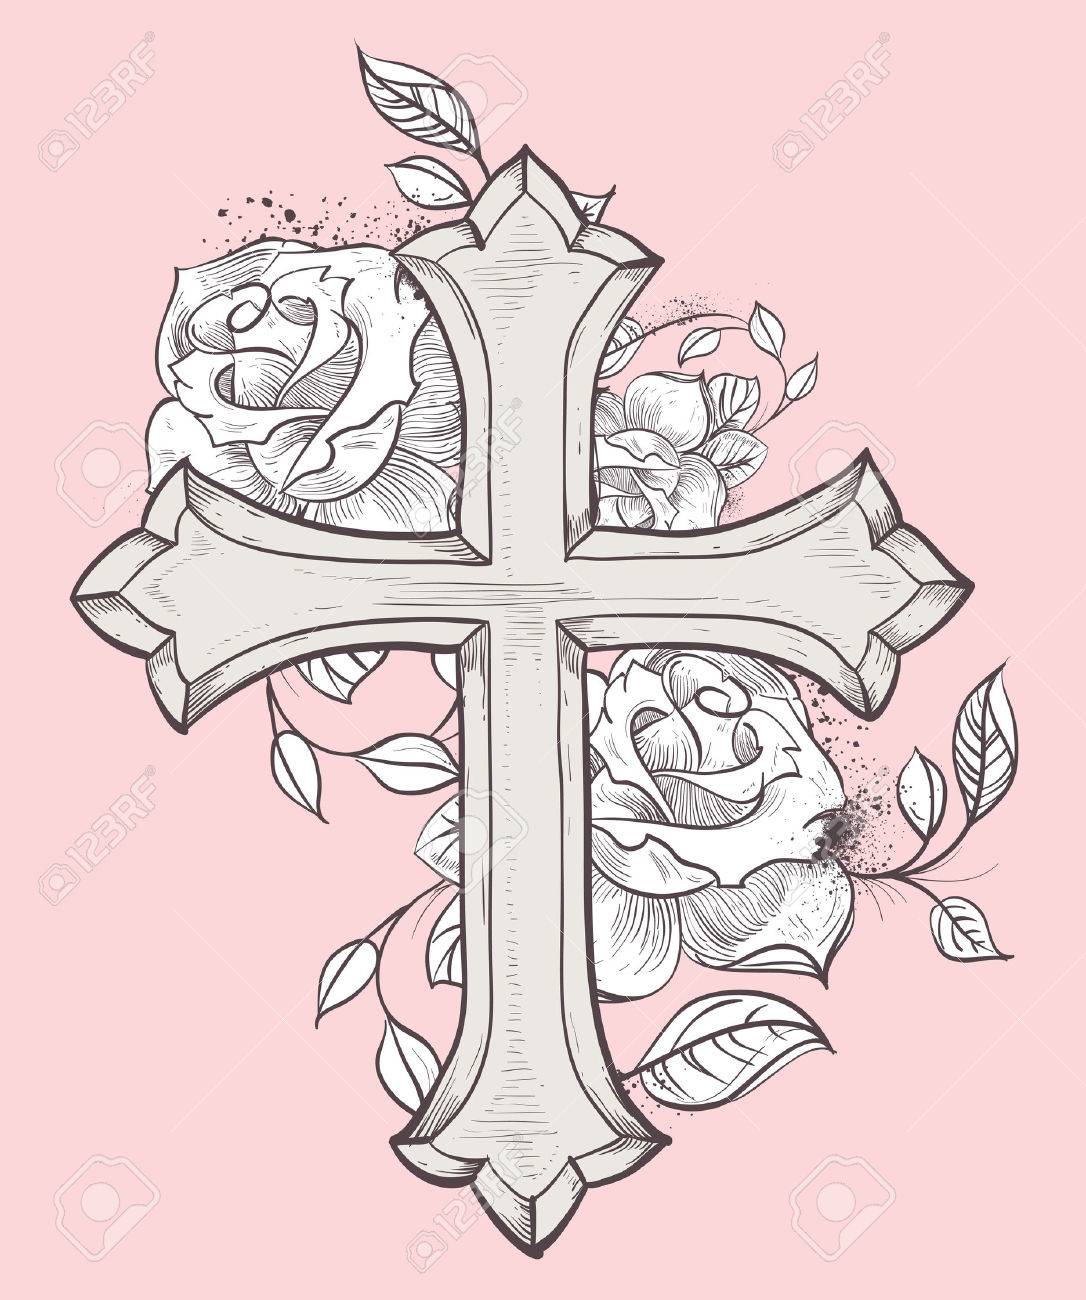 Cool Pictures Of Crosses To Draw - Cliparts.co - etcconseil